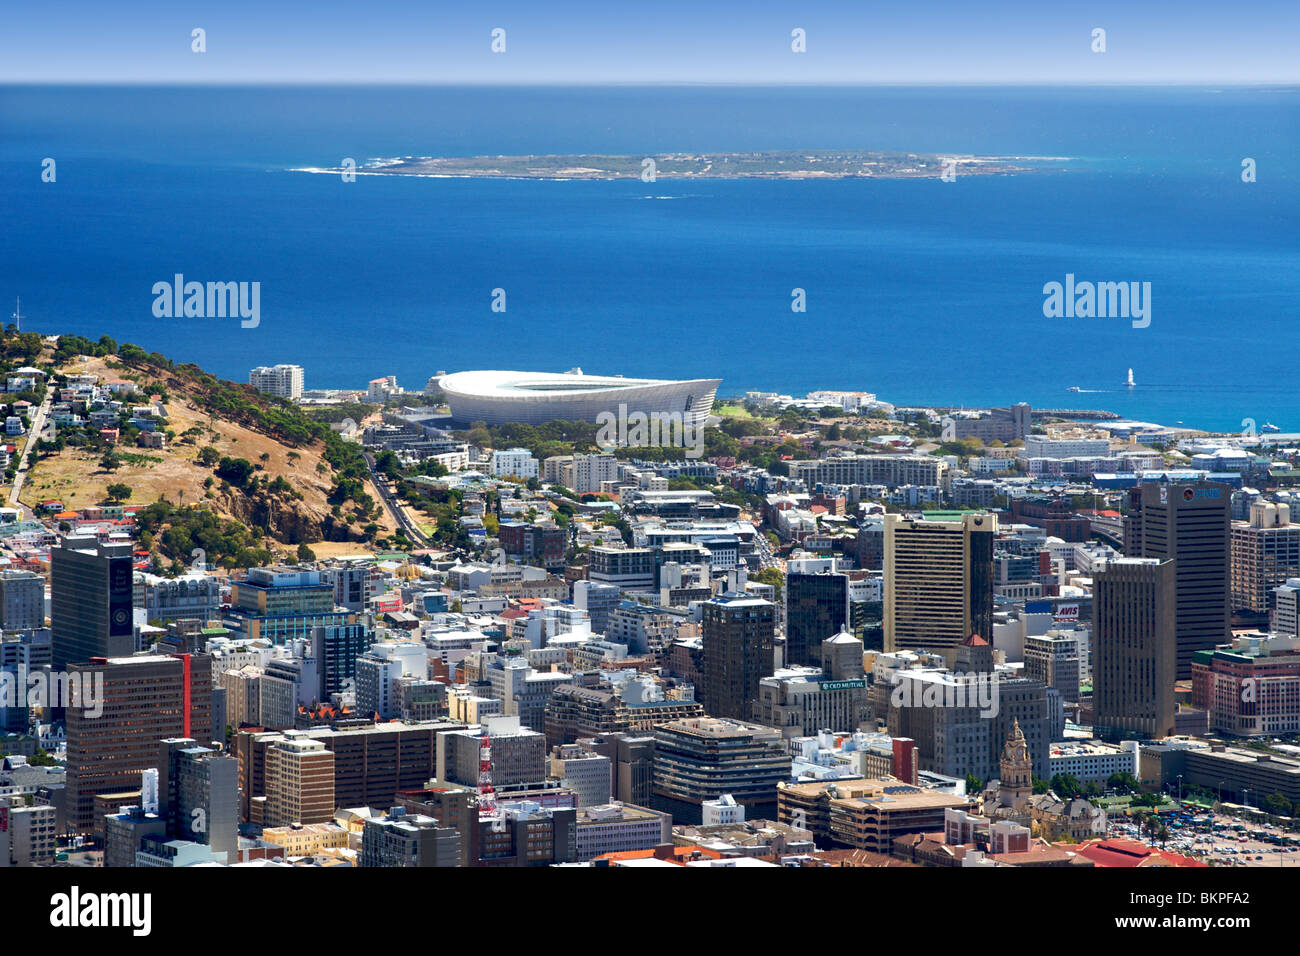 View across the city of Cape Town with the new FIFA 2010 / Green Point stadium and Robben Island in the background. Stock Photo